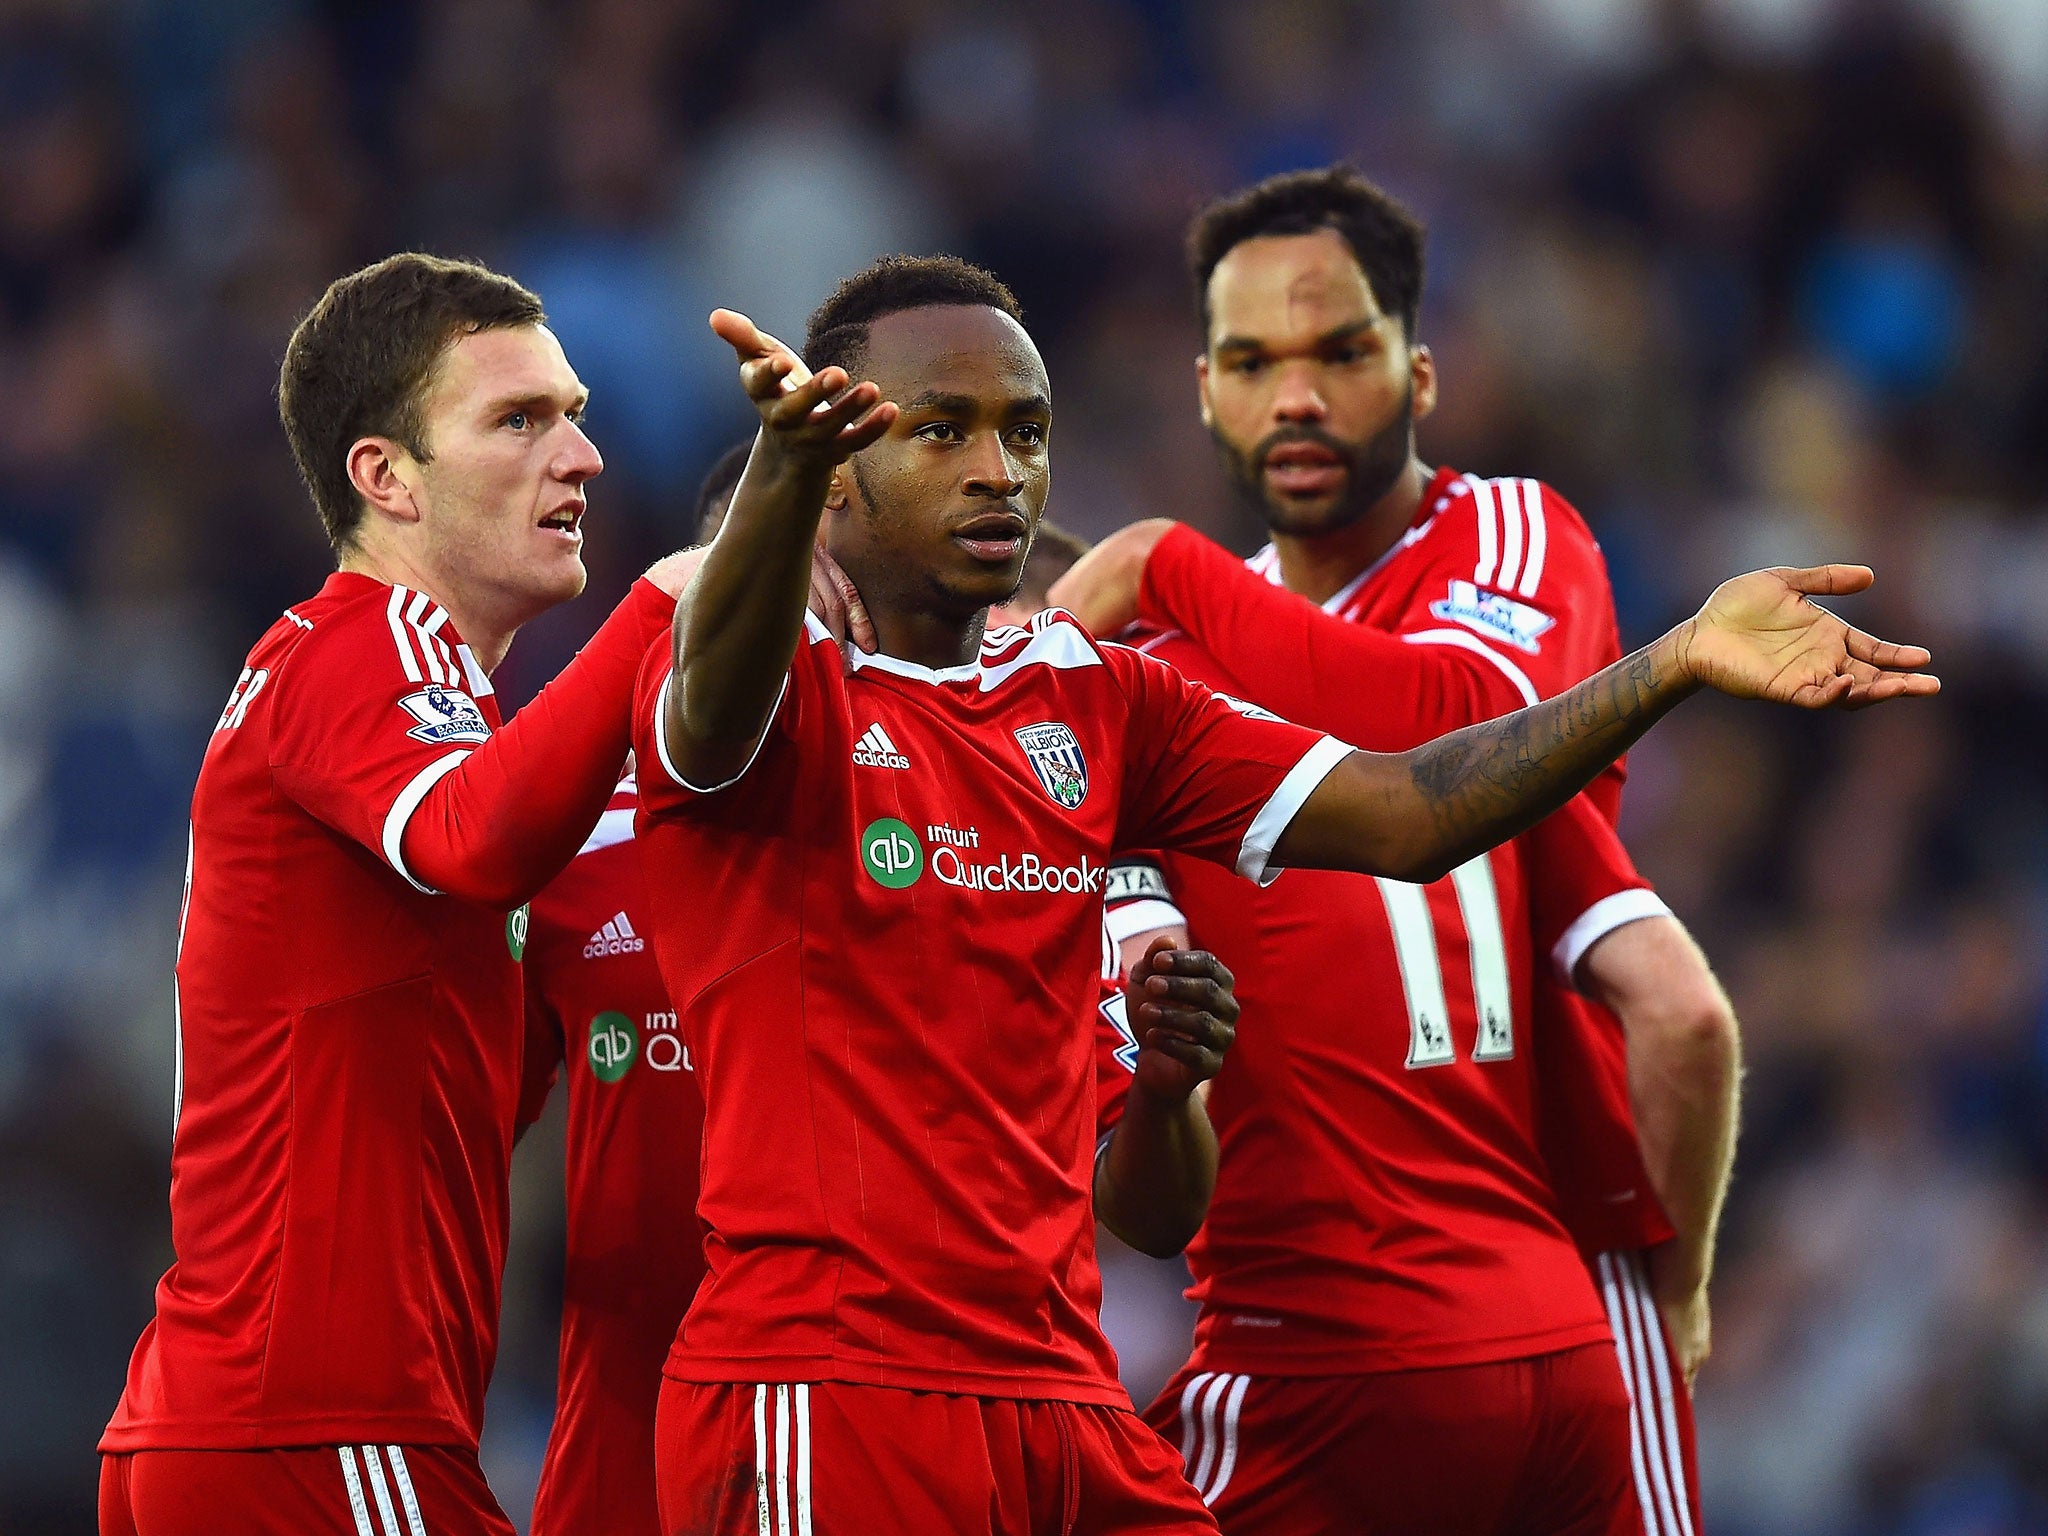 Saido Berahino celebrates Esteban Cambiasso's own goal that gave West Brom the lead